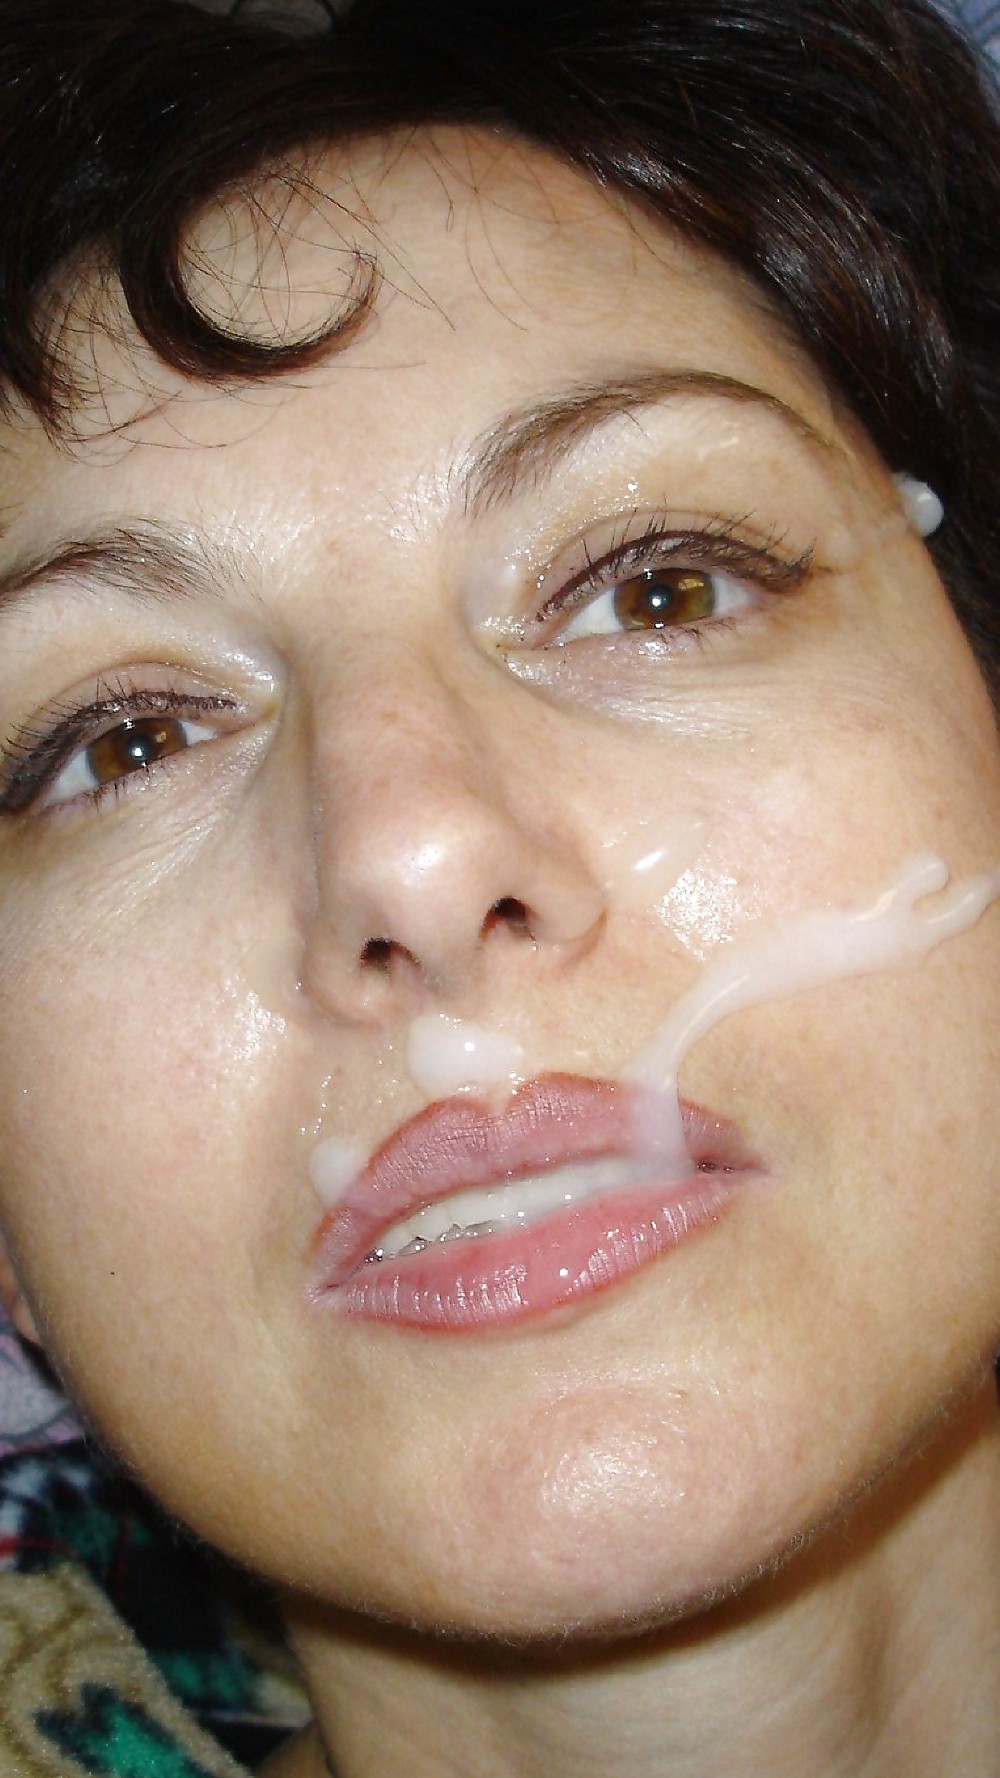 FULL LOAD IN THE FACE 21 porn pictures